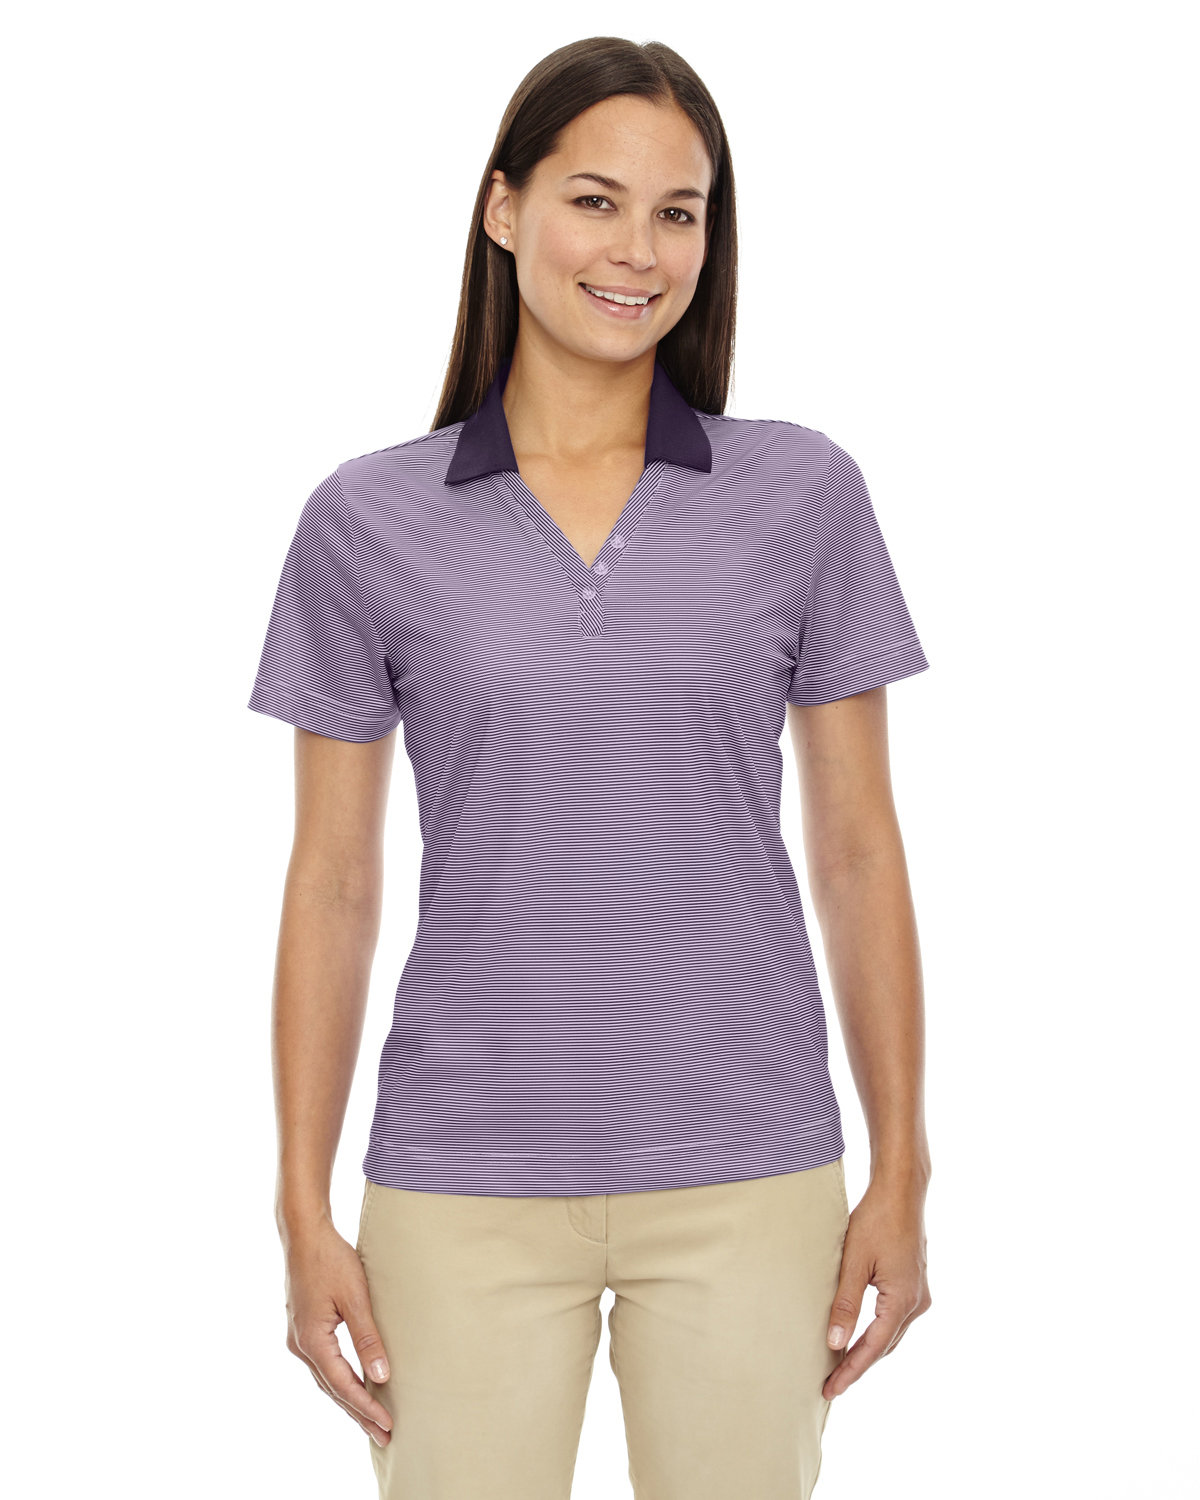 Extreme Ladies' Eperformance™ Launch Snag Protection Striped Polo MULBERRY PURPLE 